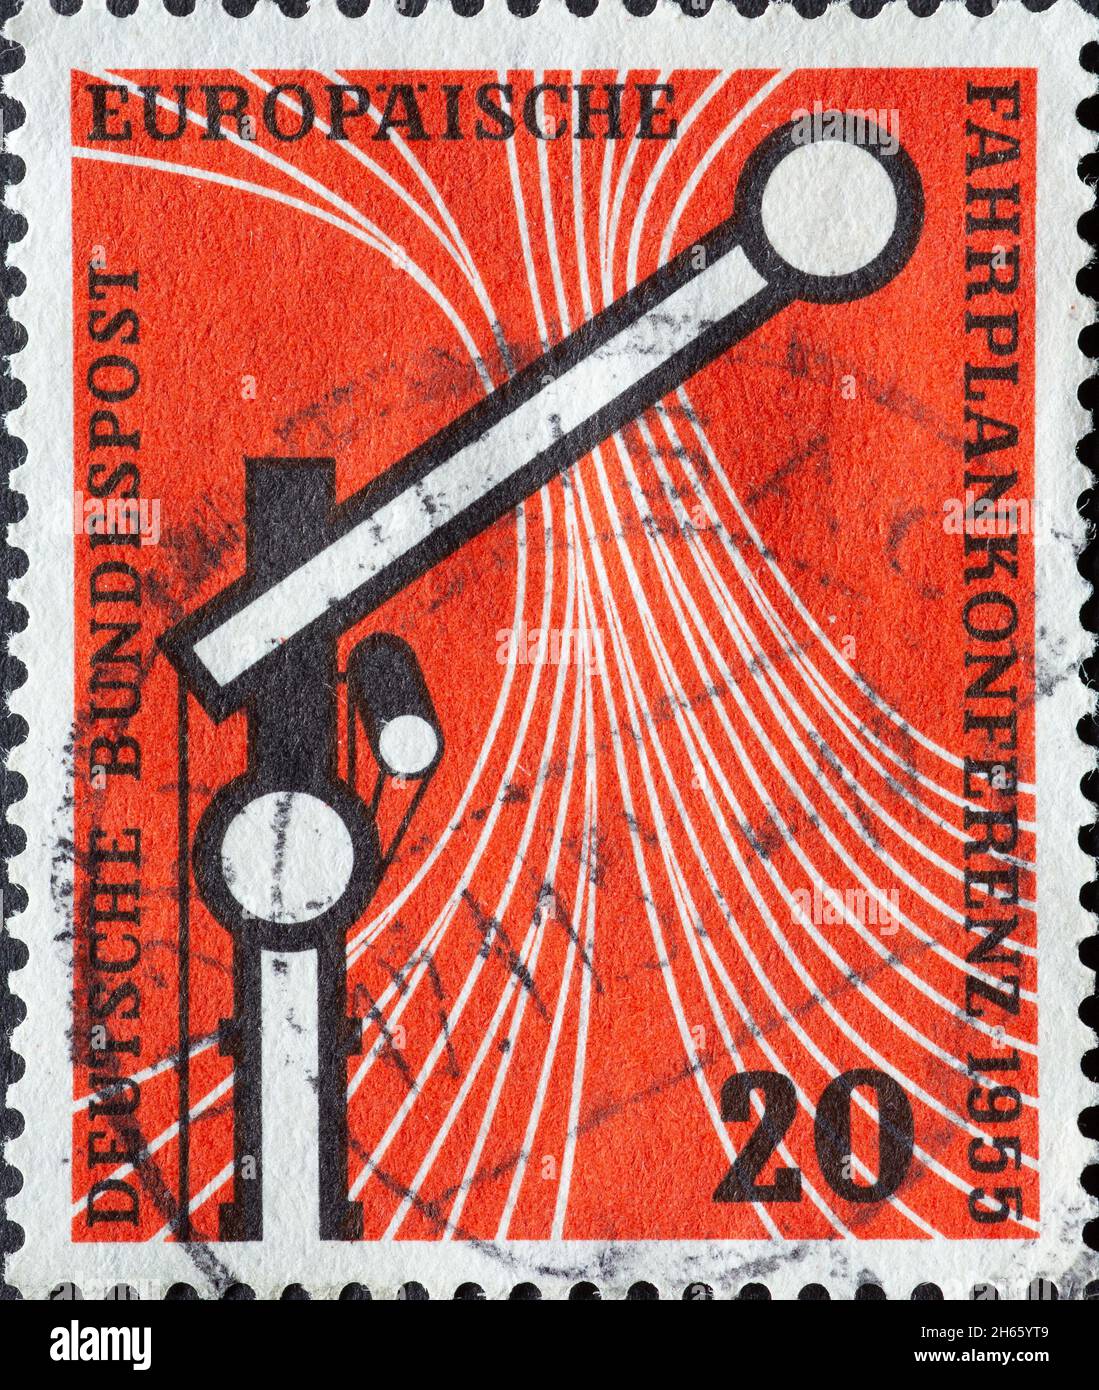 GERMANY - CIRCA 1955:This postage stamp shows a railway signal against a red background. The reason for this postage stamp was the 1955 European Timet Stock Photo